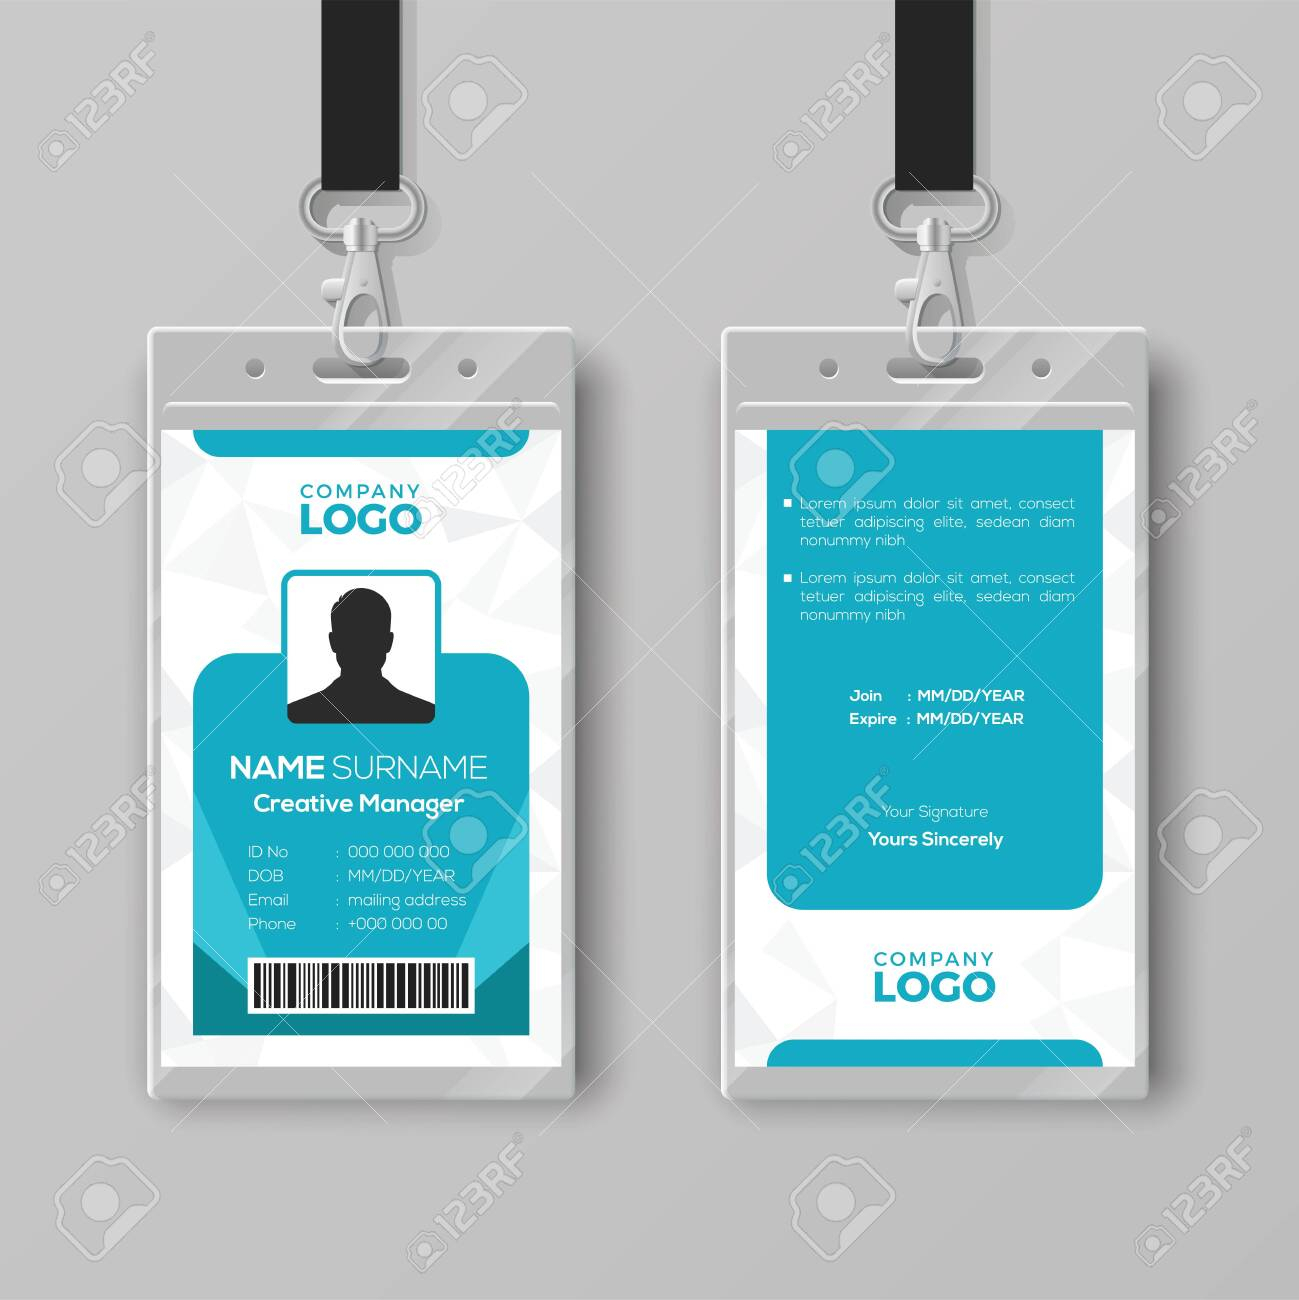 Corporate Id Card Design Template For Company Id Card Design Template